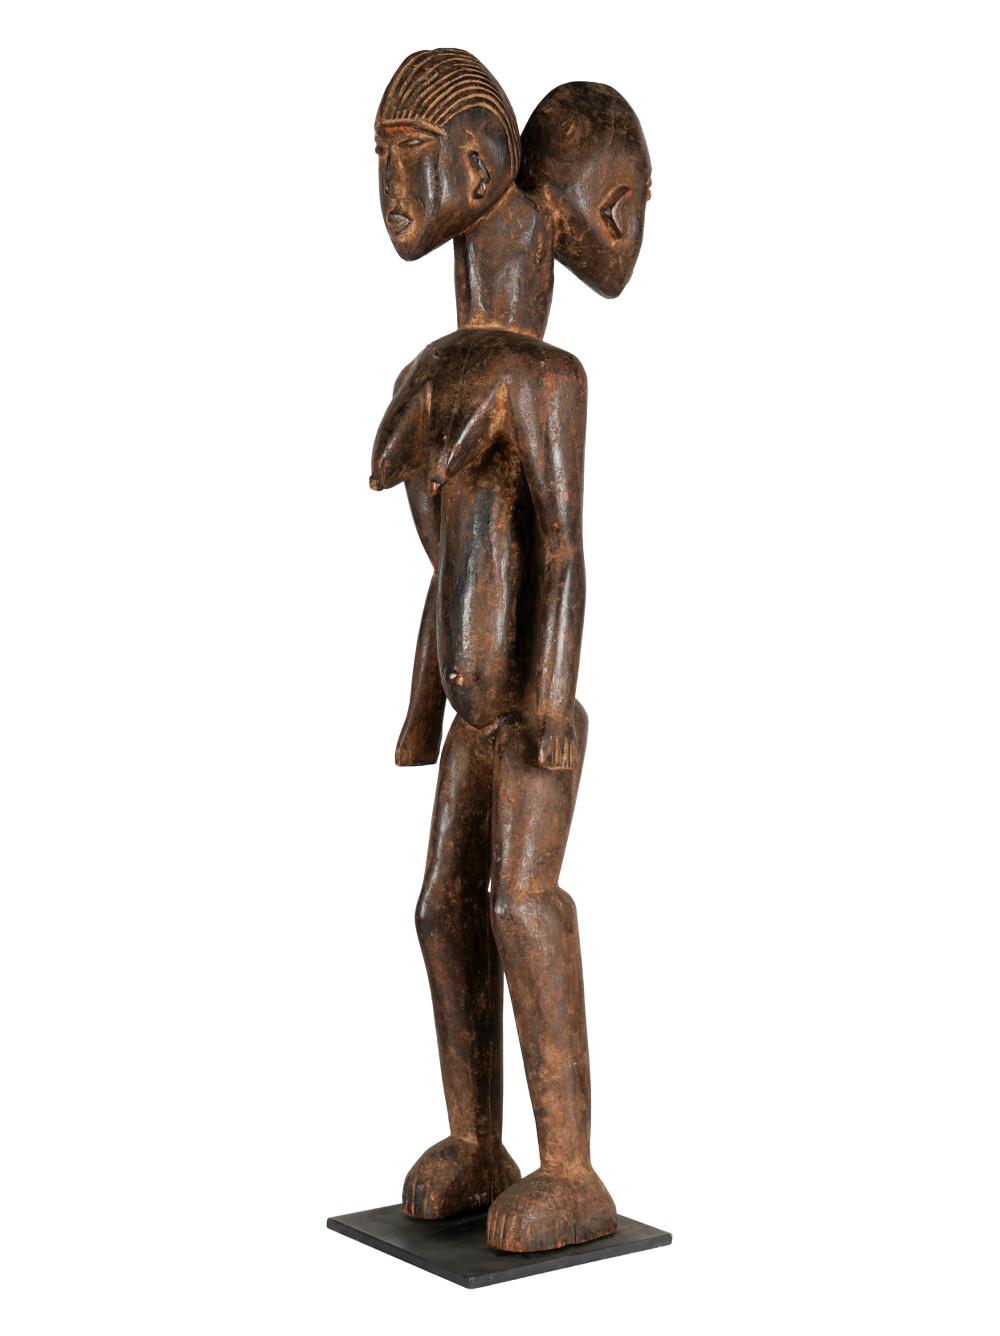 AFRICAN DOUBLE-HEADED WOOD CARVINGIvory